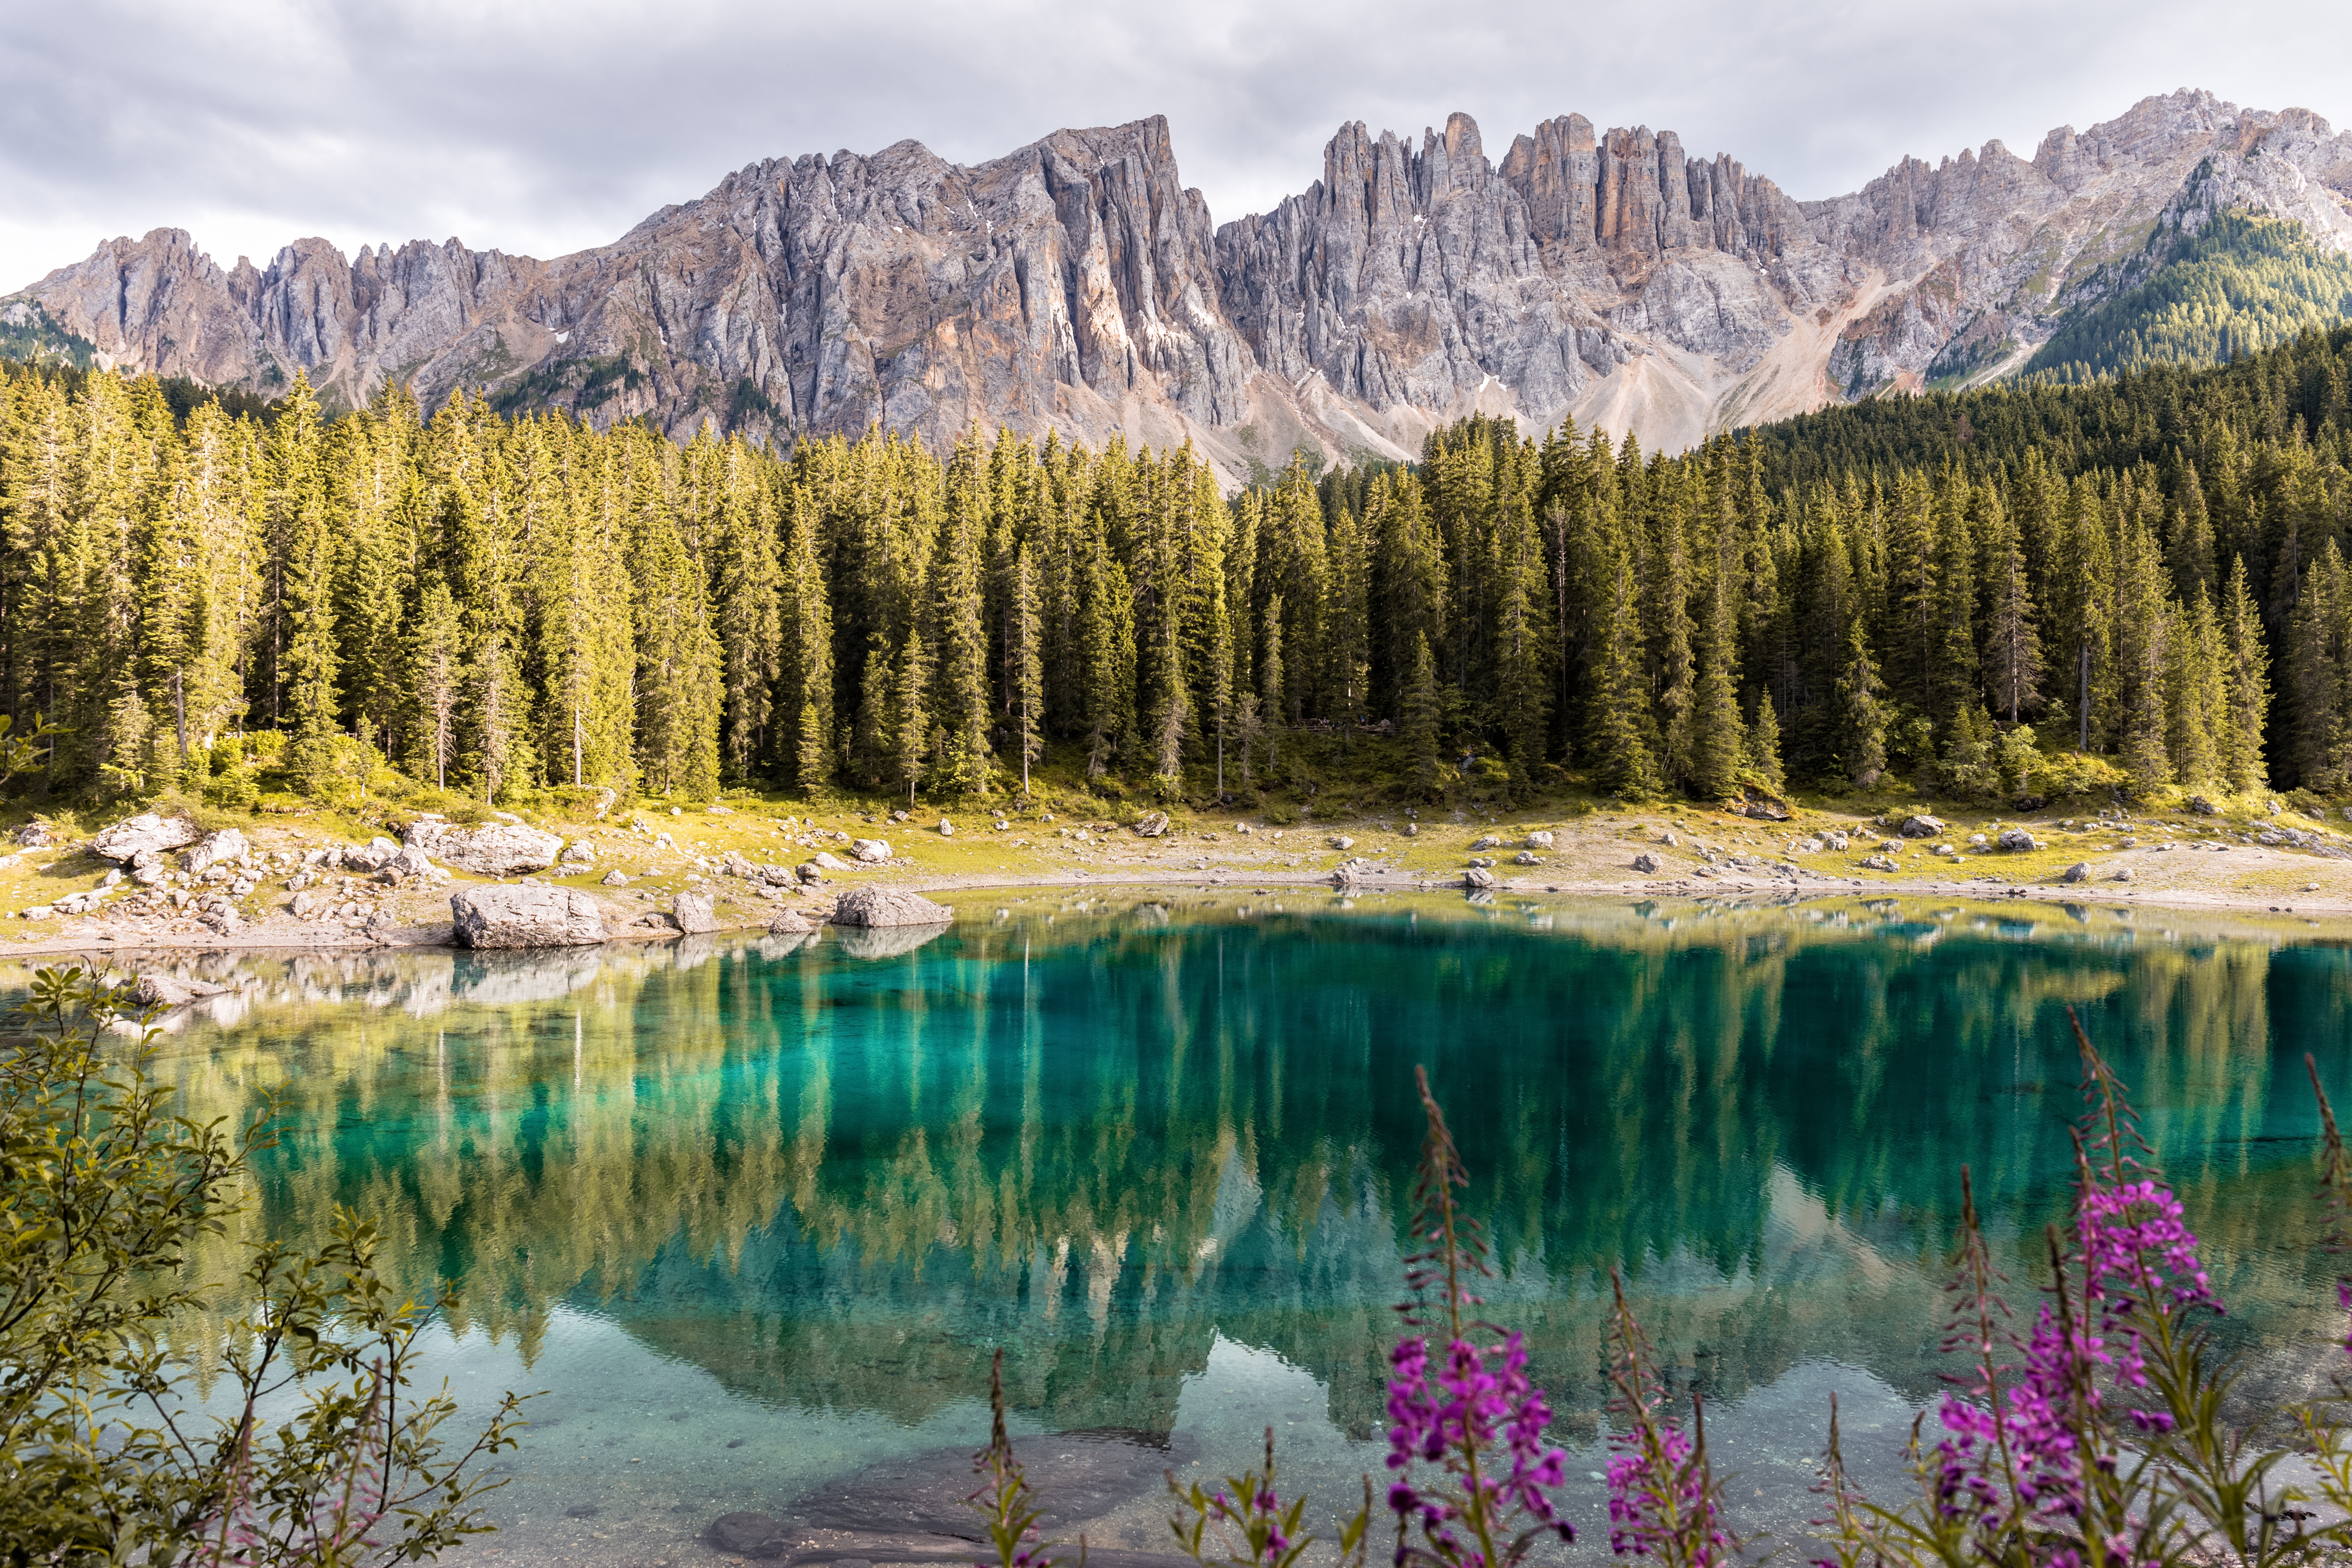 93157 download wallpaper landscape, nature, trees, mountains, italy, lake, mountain landscape screensavers and pictures for free